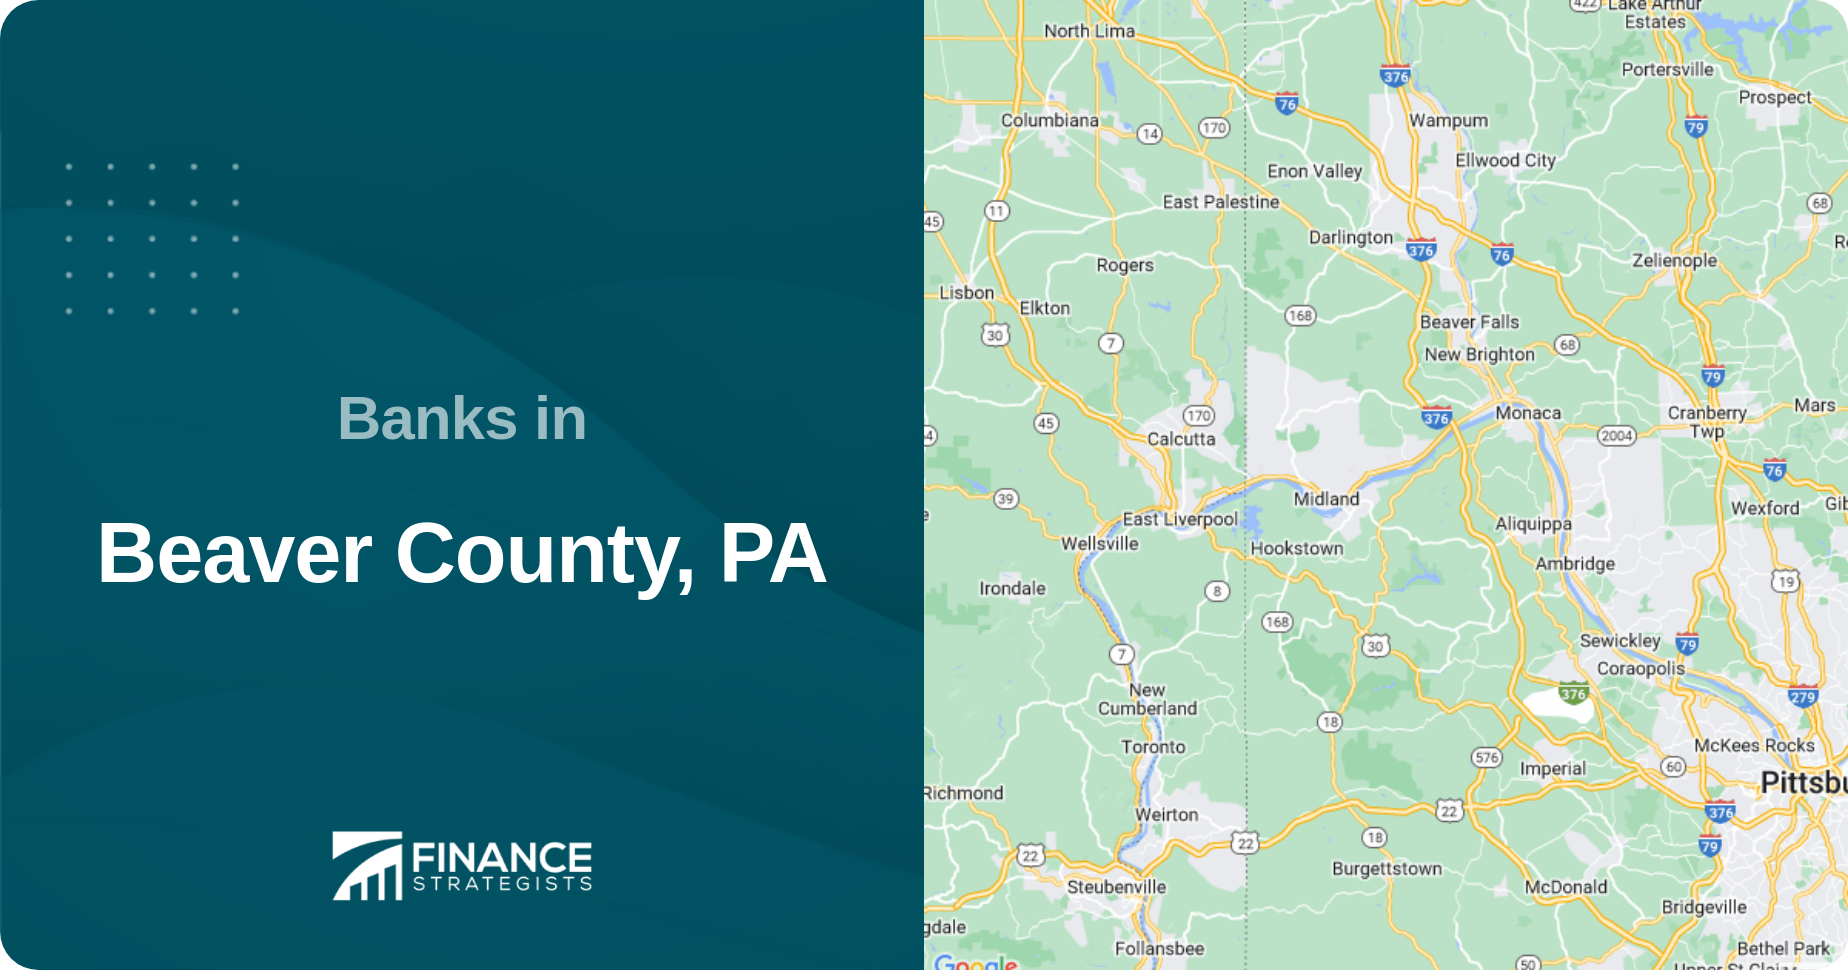 Banks in Beaver County, PA